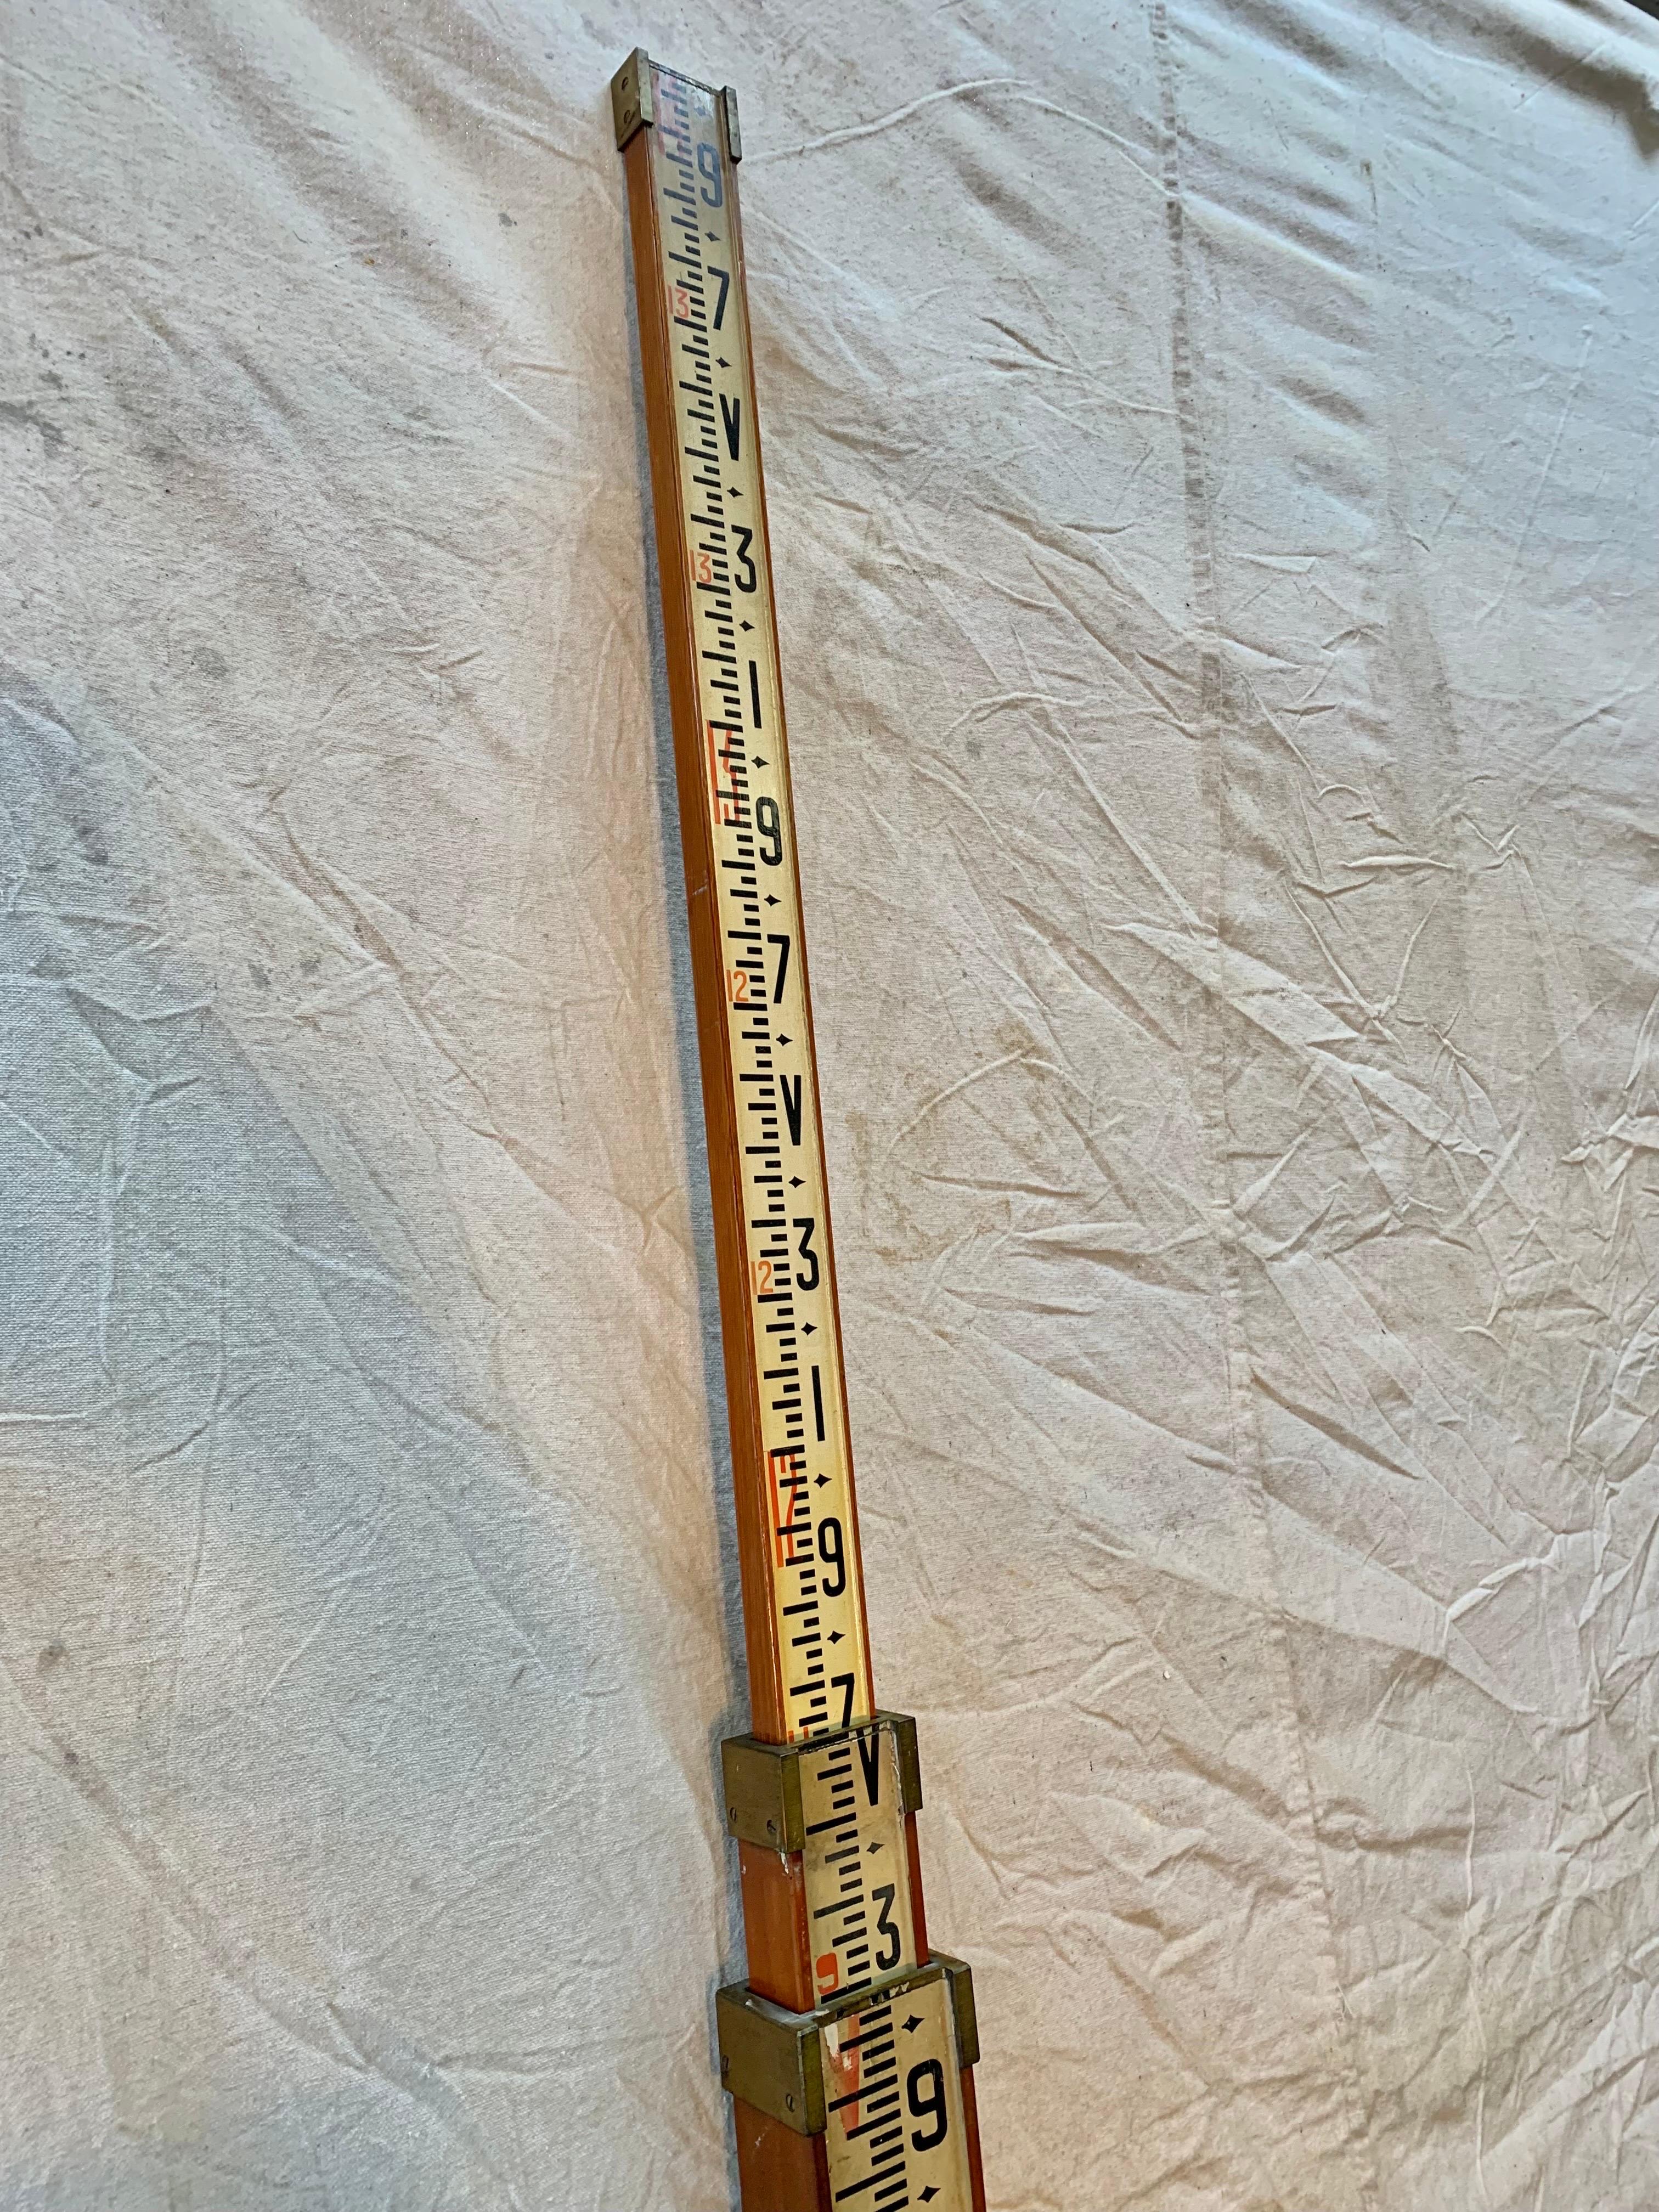 Early 20th Century English Telescoping Surveyors Measure In Good Condition For Sale In Burton, TX